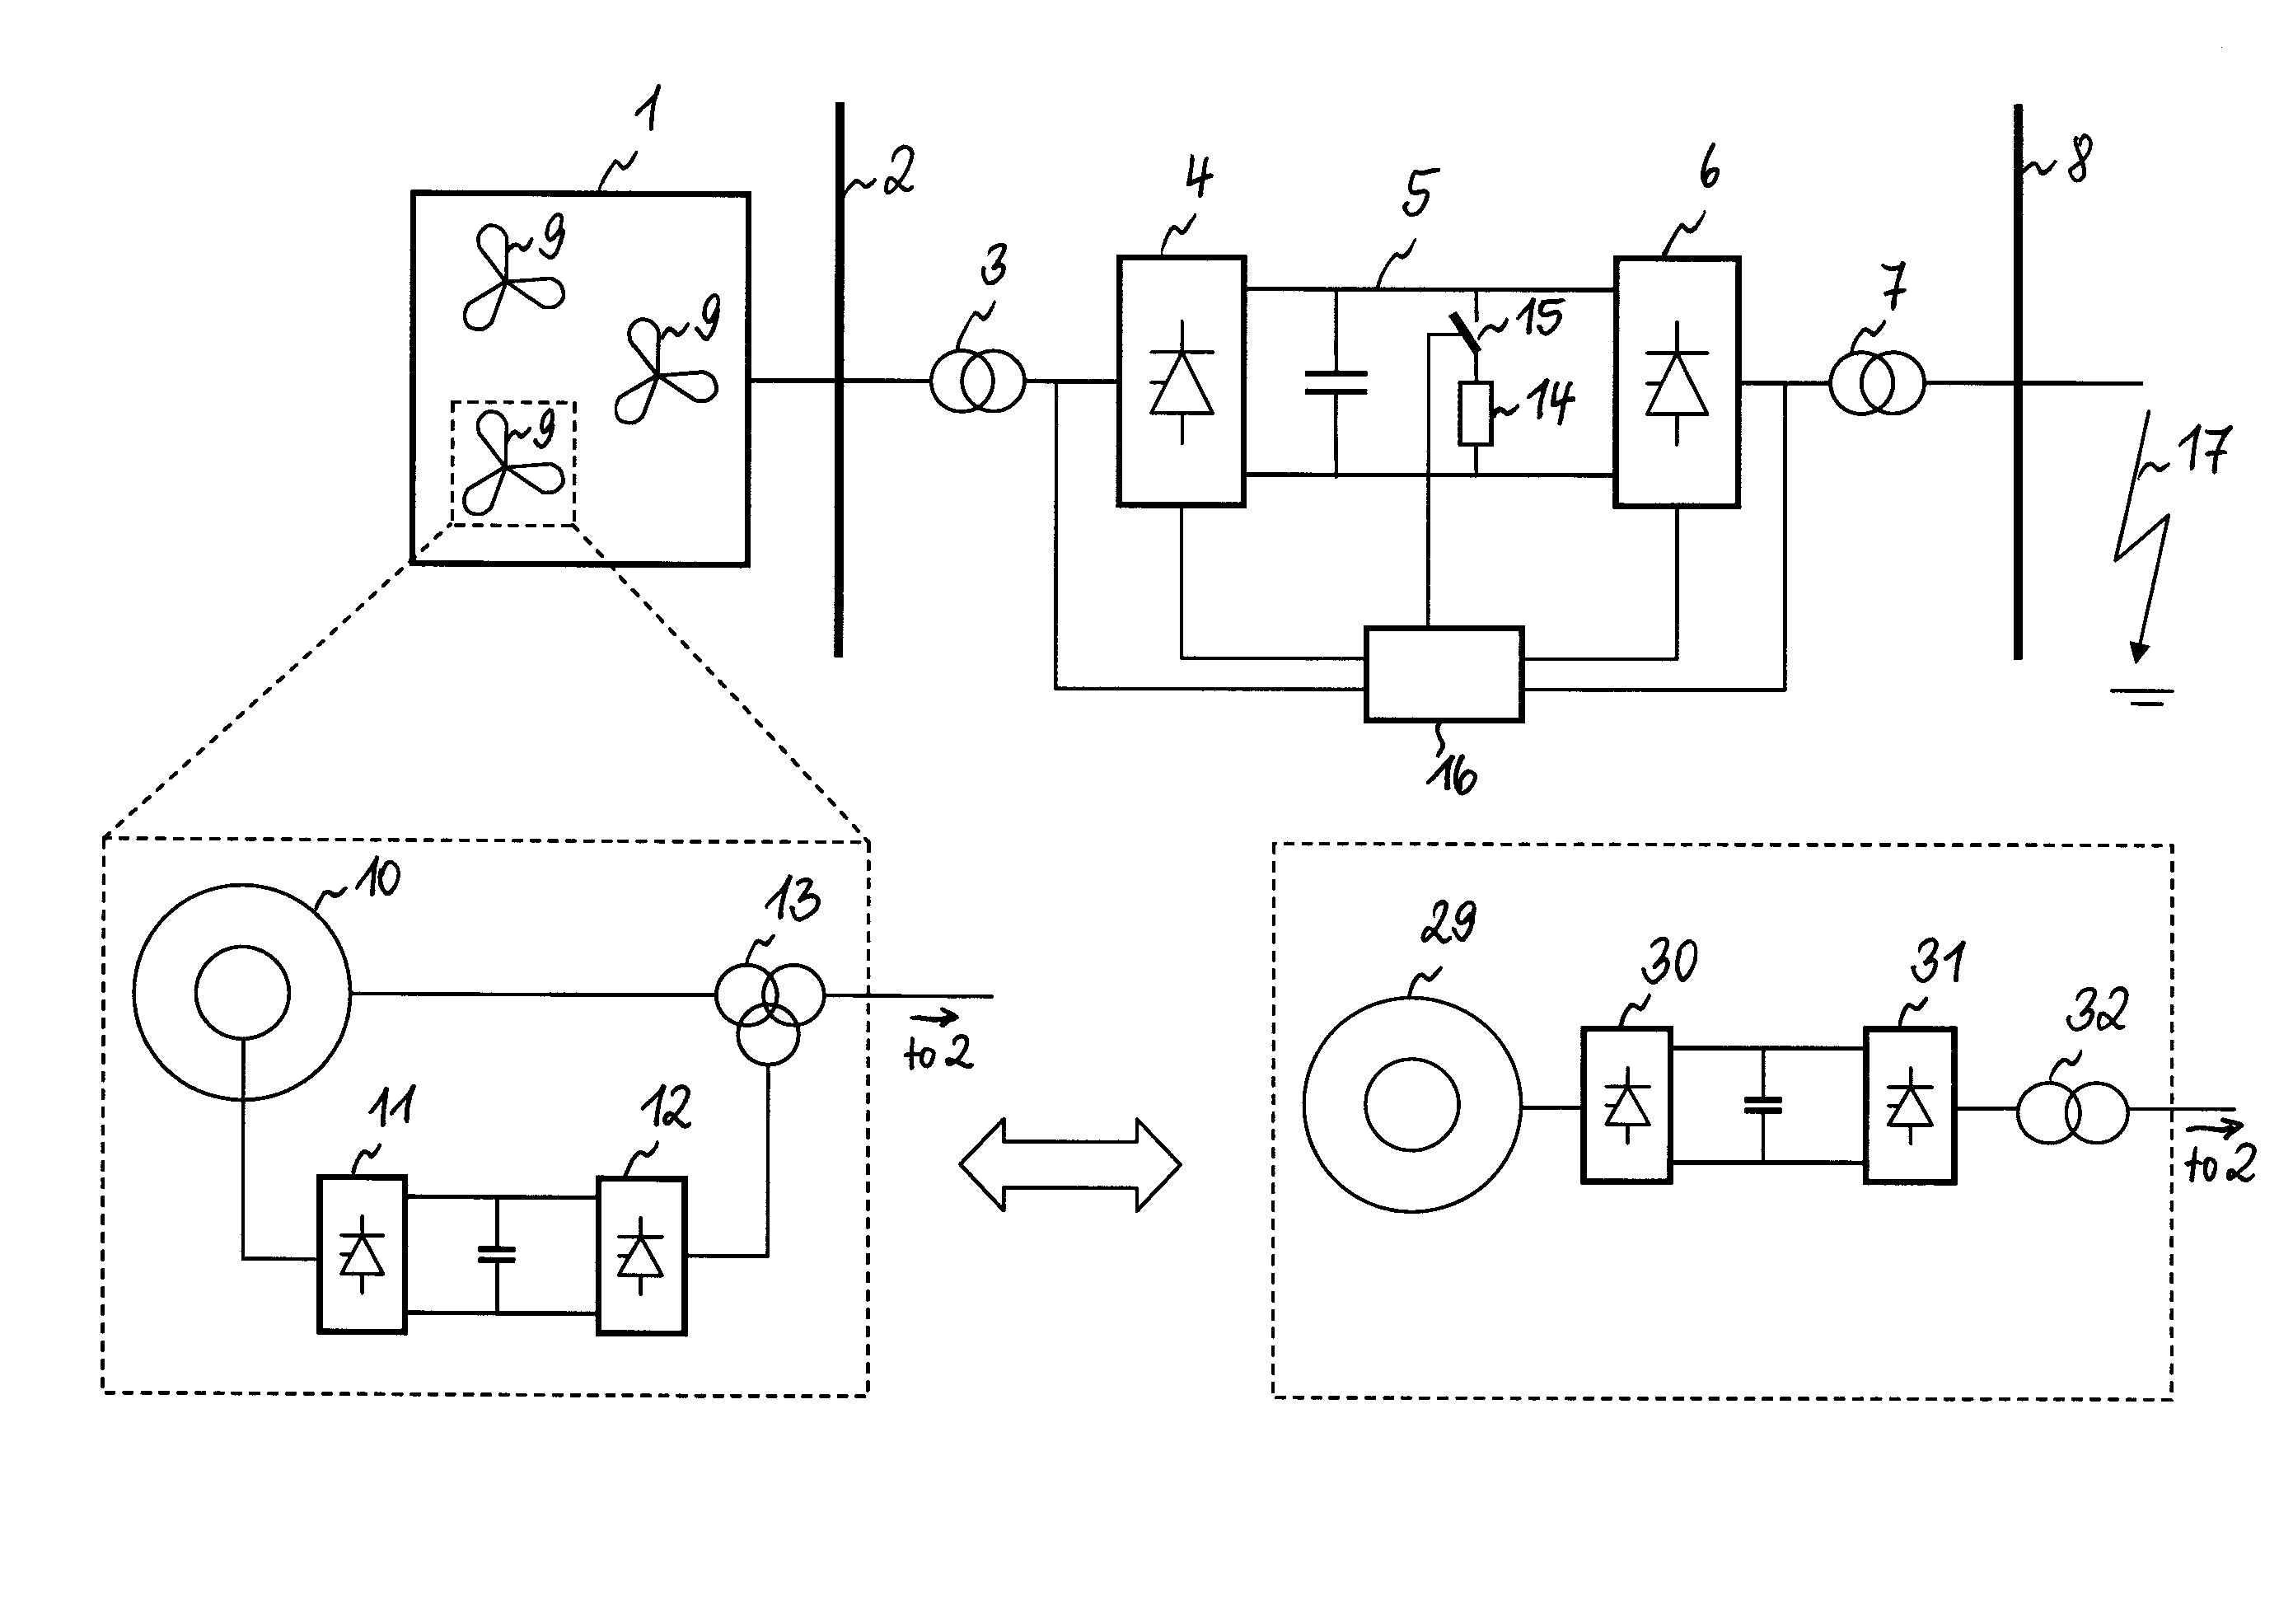 Method and system to influence the power generation of an adjustable speed generator